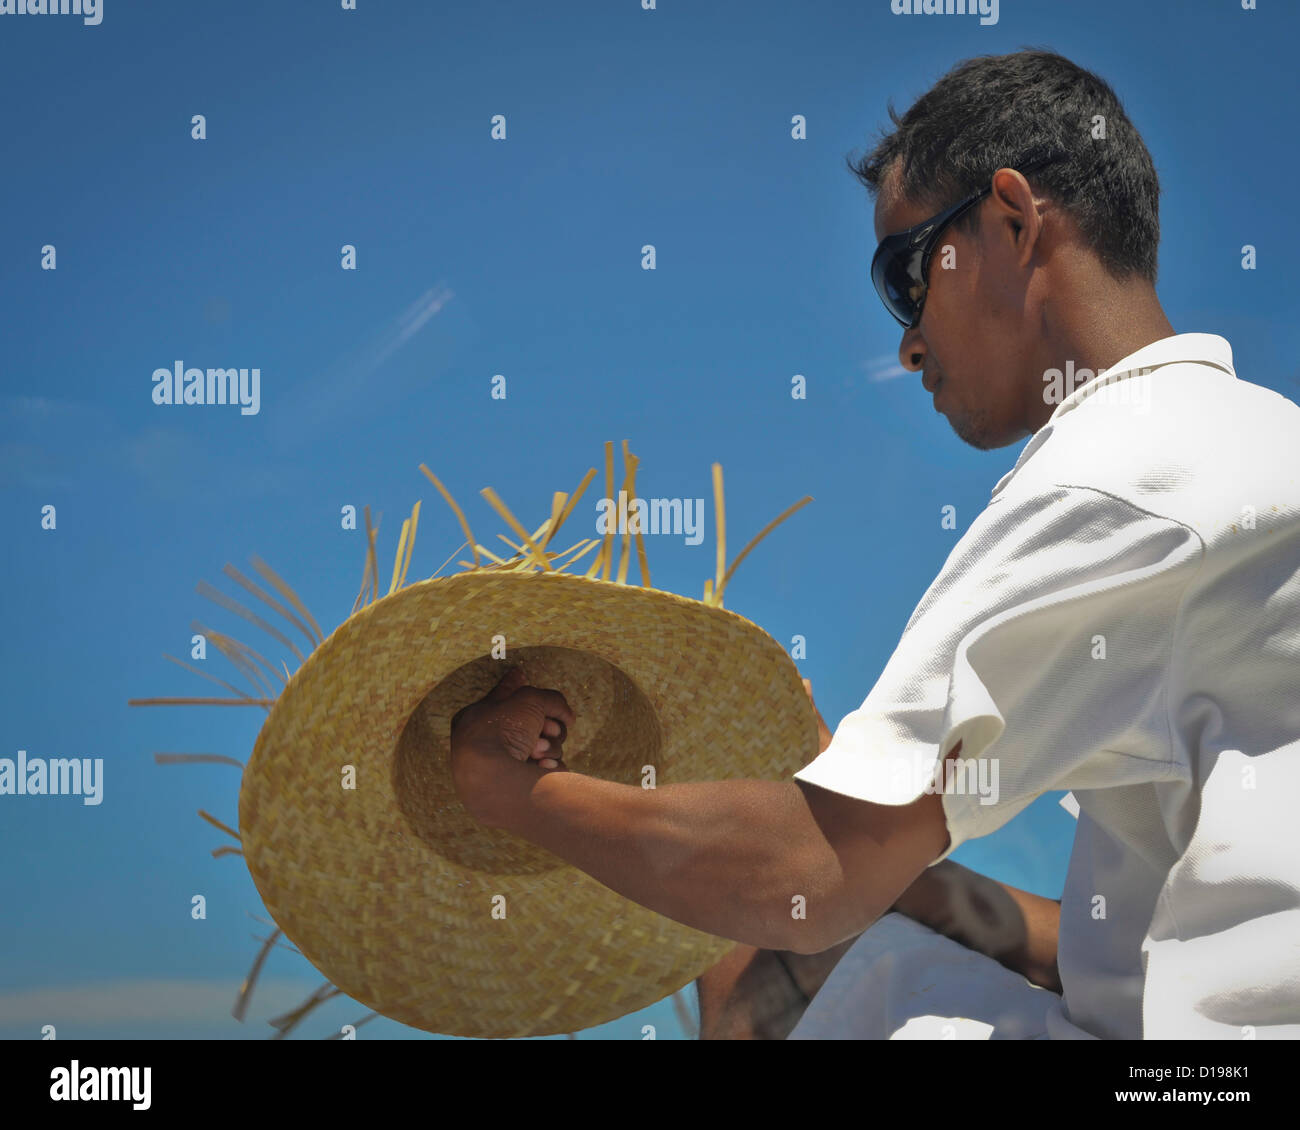 A crewman on an inter island ferry gets his hat ready to spin in the wind, Indonesia Stock Photo